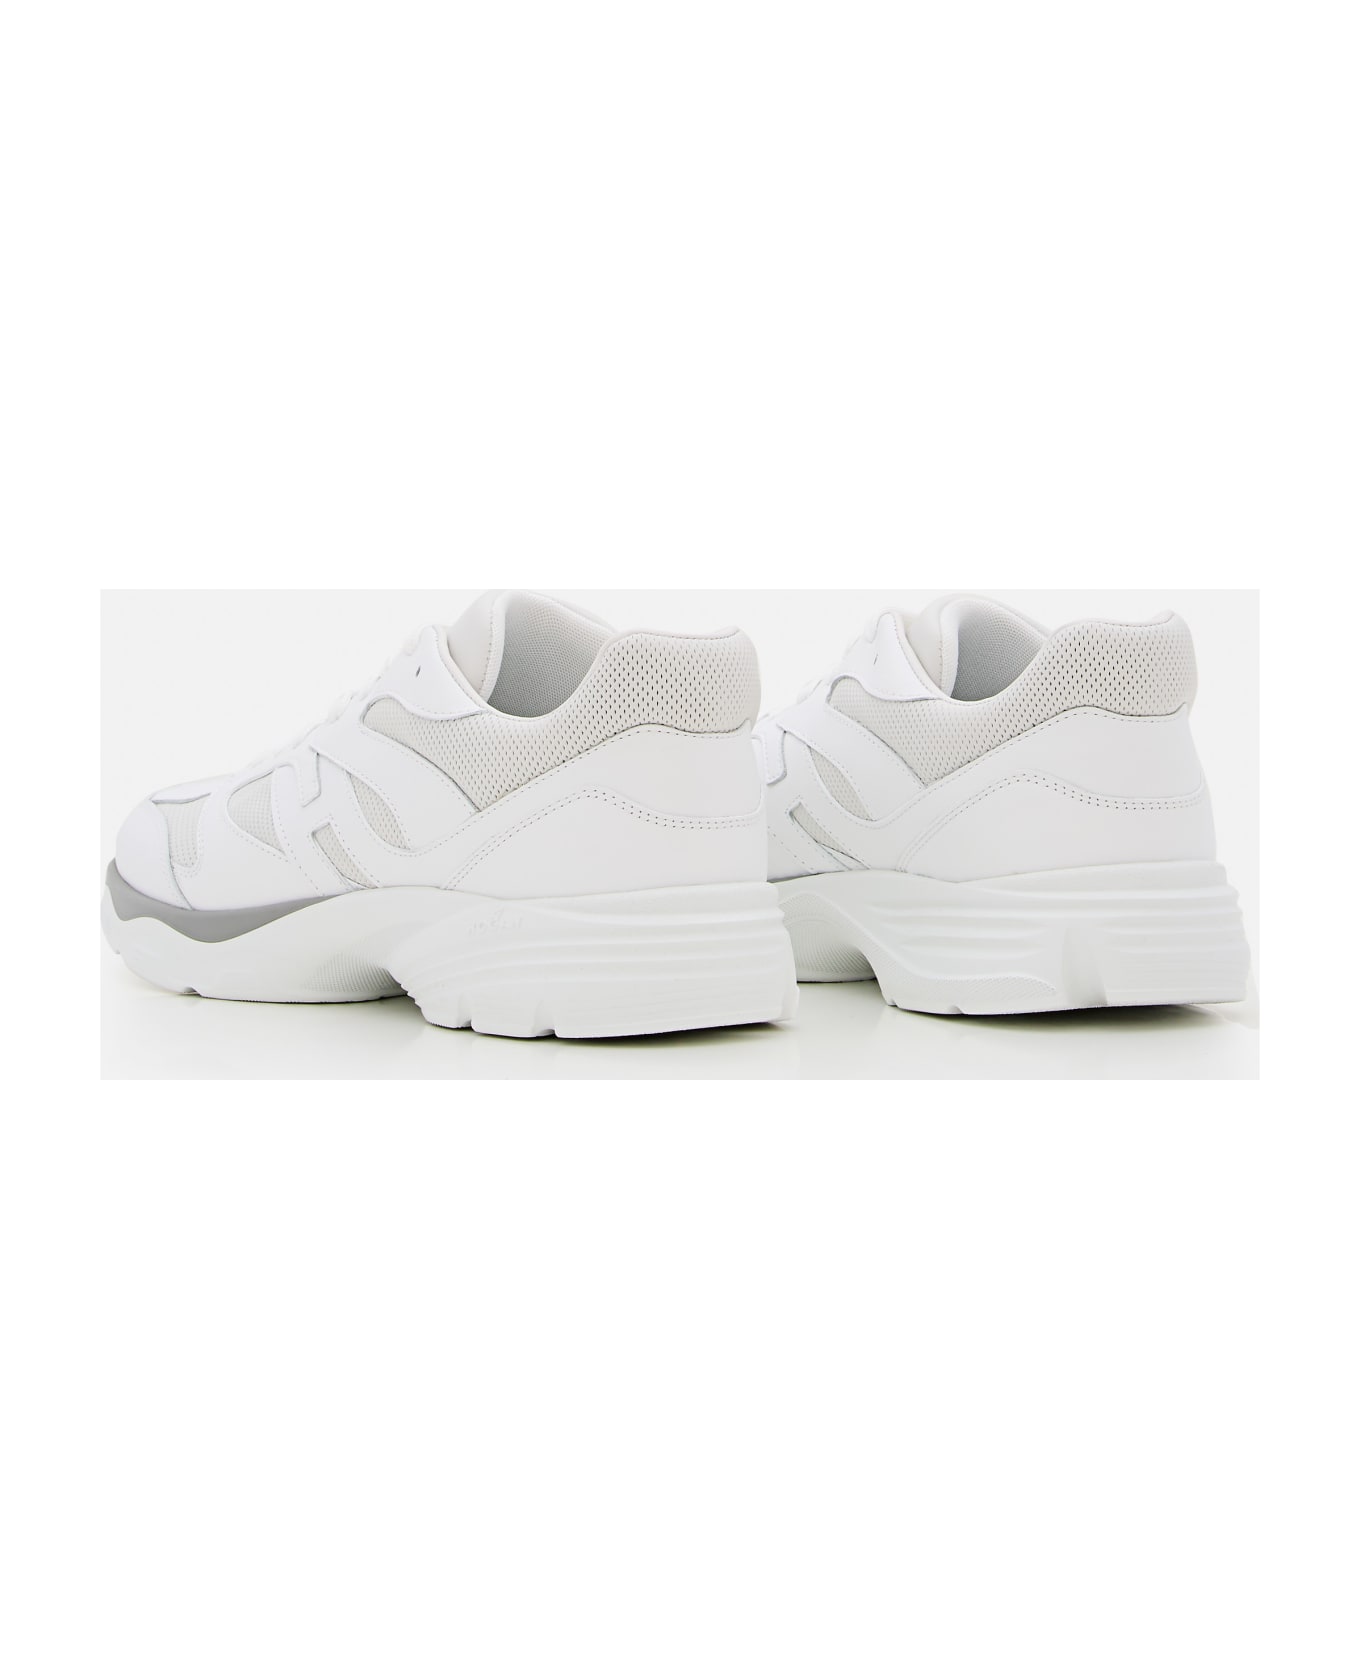 Hogan Allac Panelled Lace-up Sneakers - WHITE